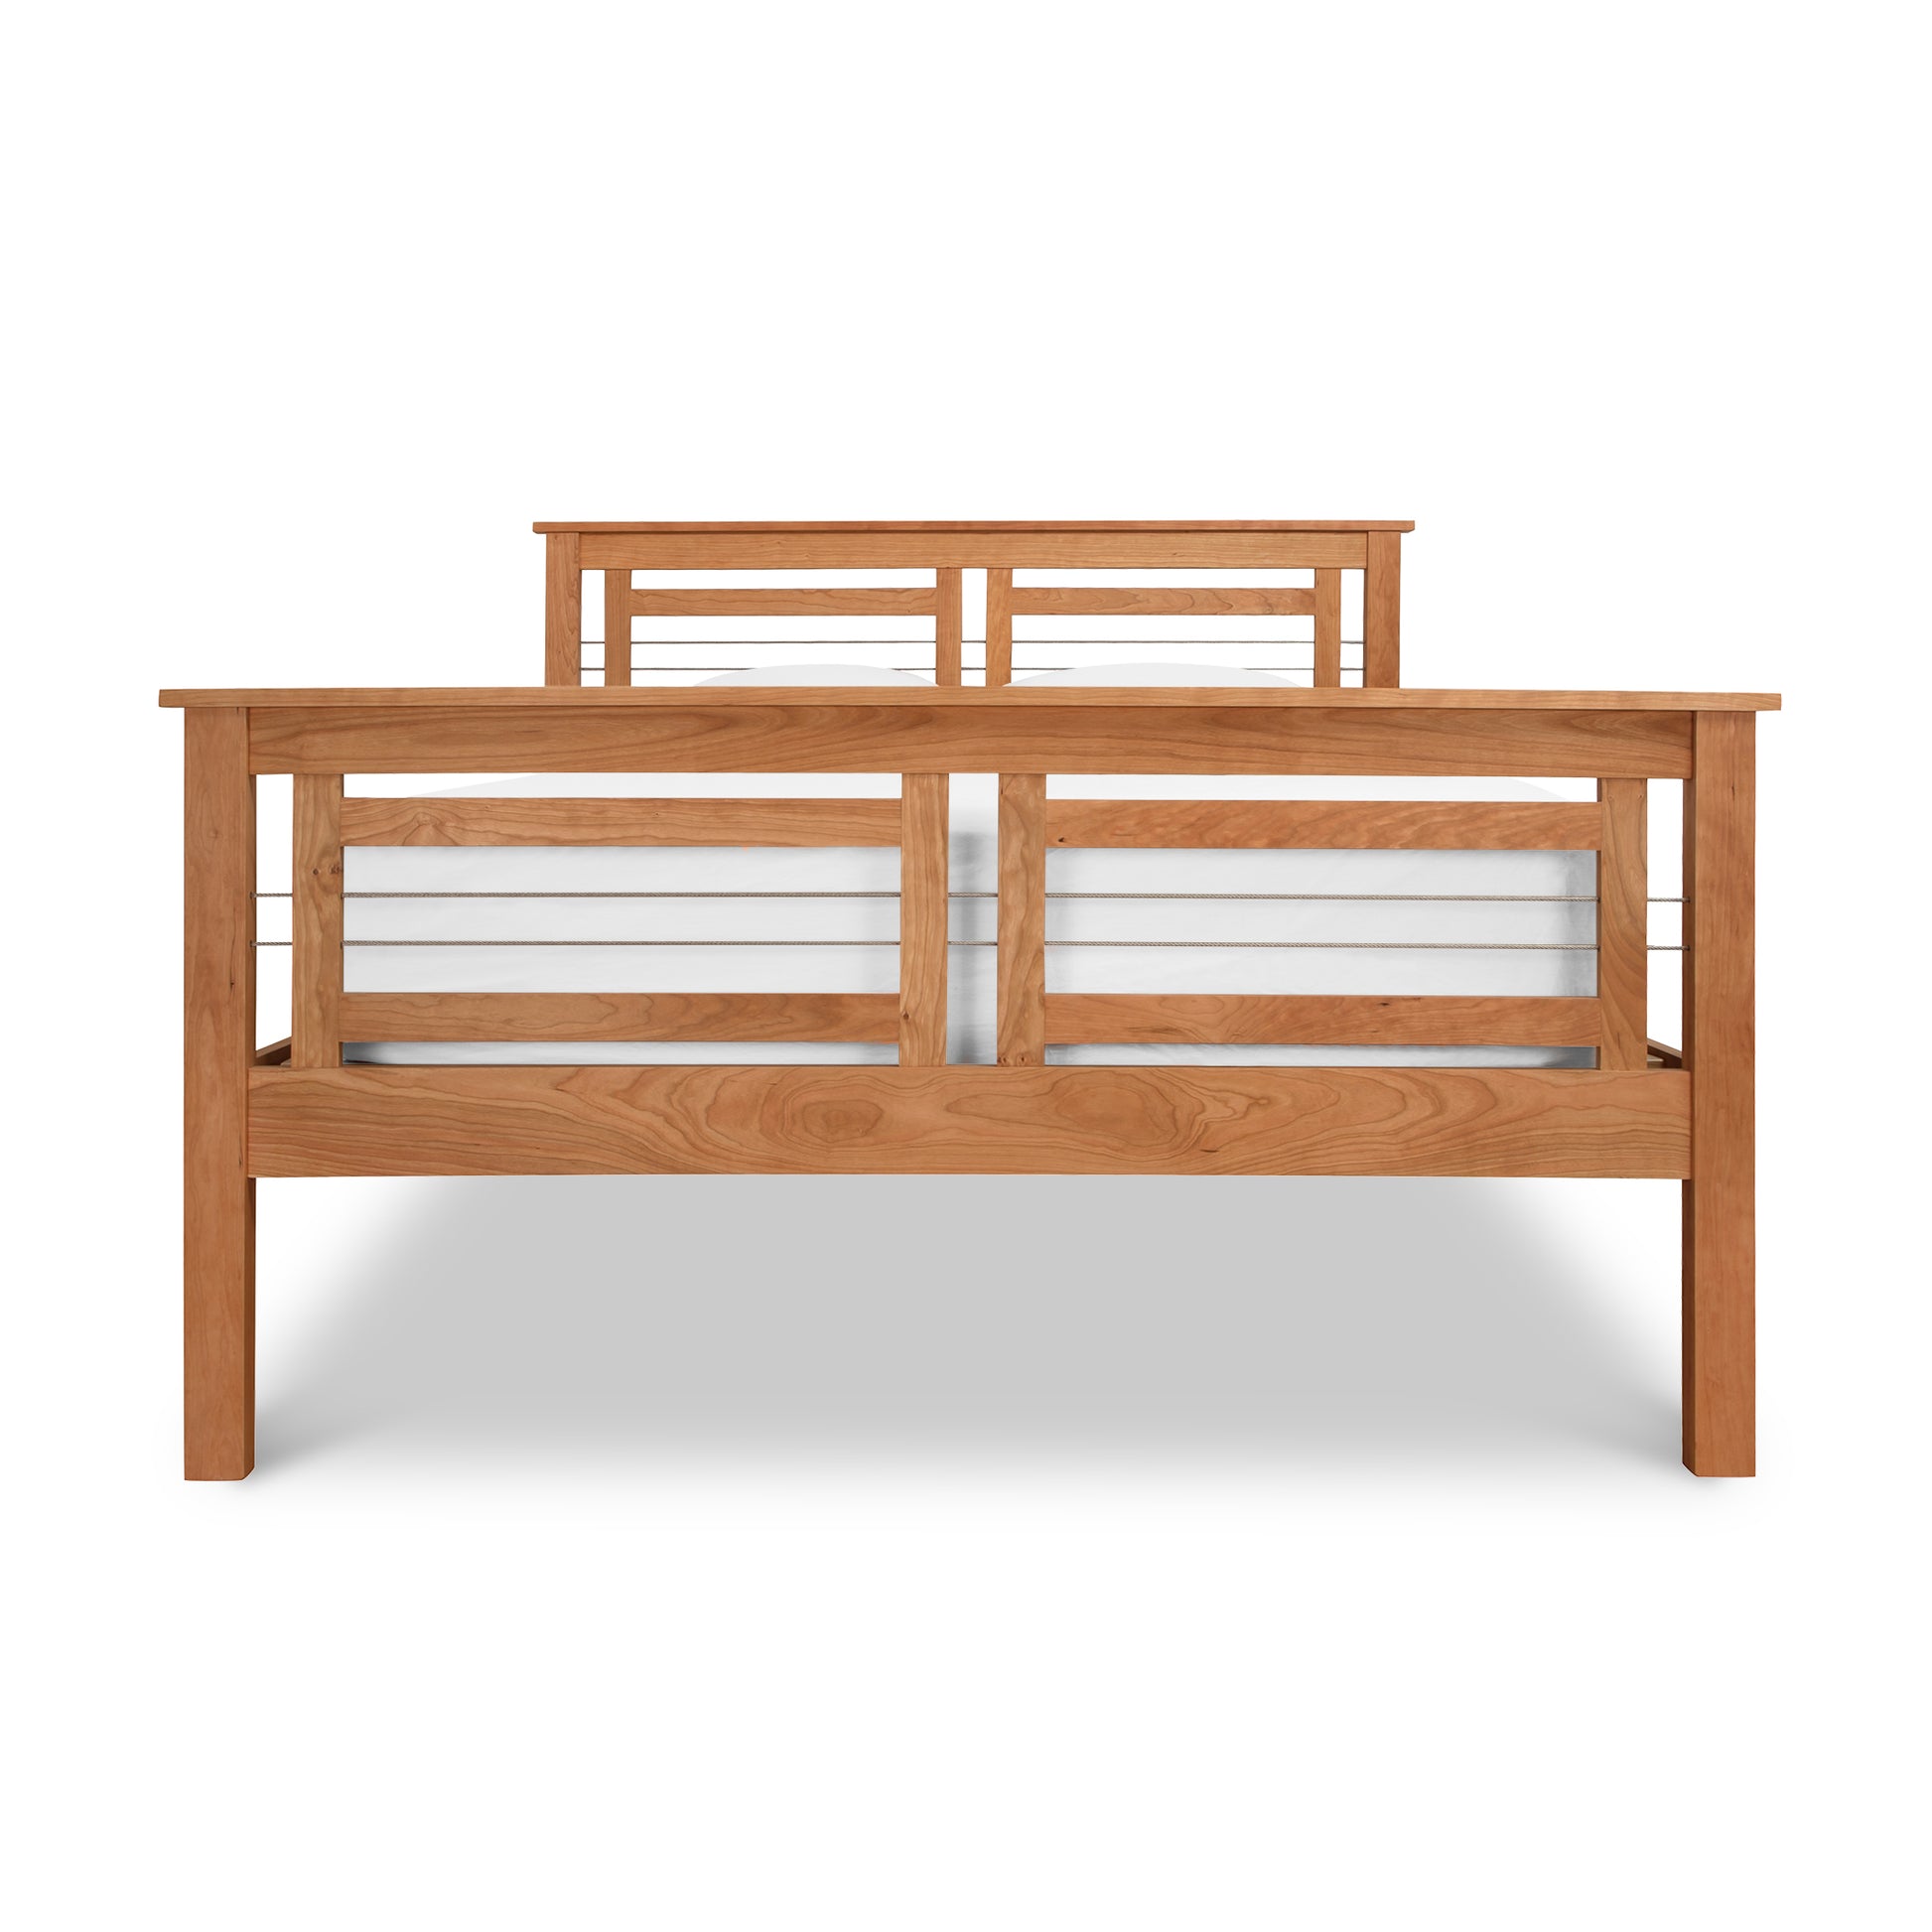 Contemporary Vermont Furniture Designs Cable Bed with headboard and footboard, featuring solid hardwood construction, displayed against a white background.